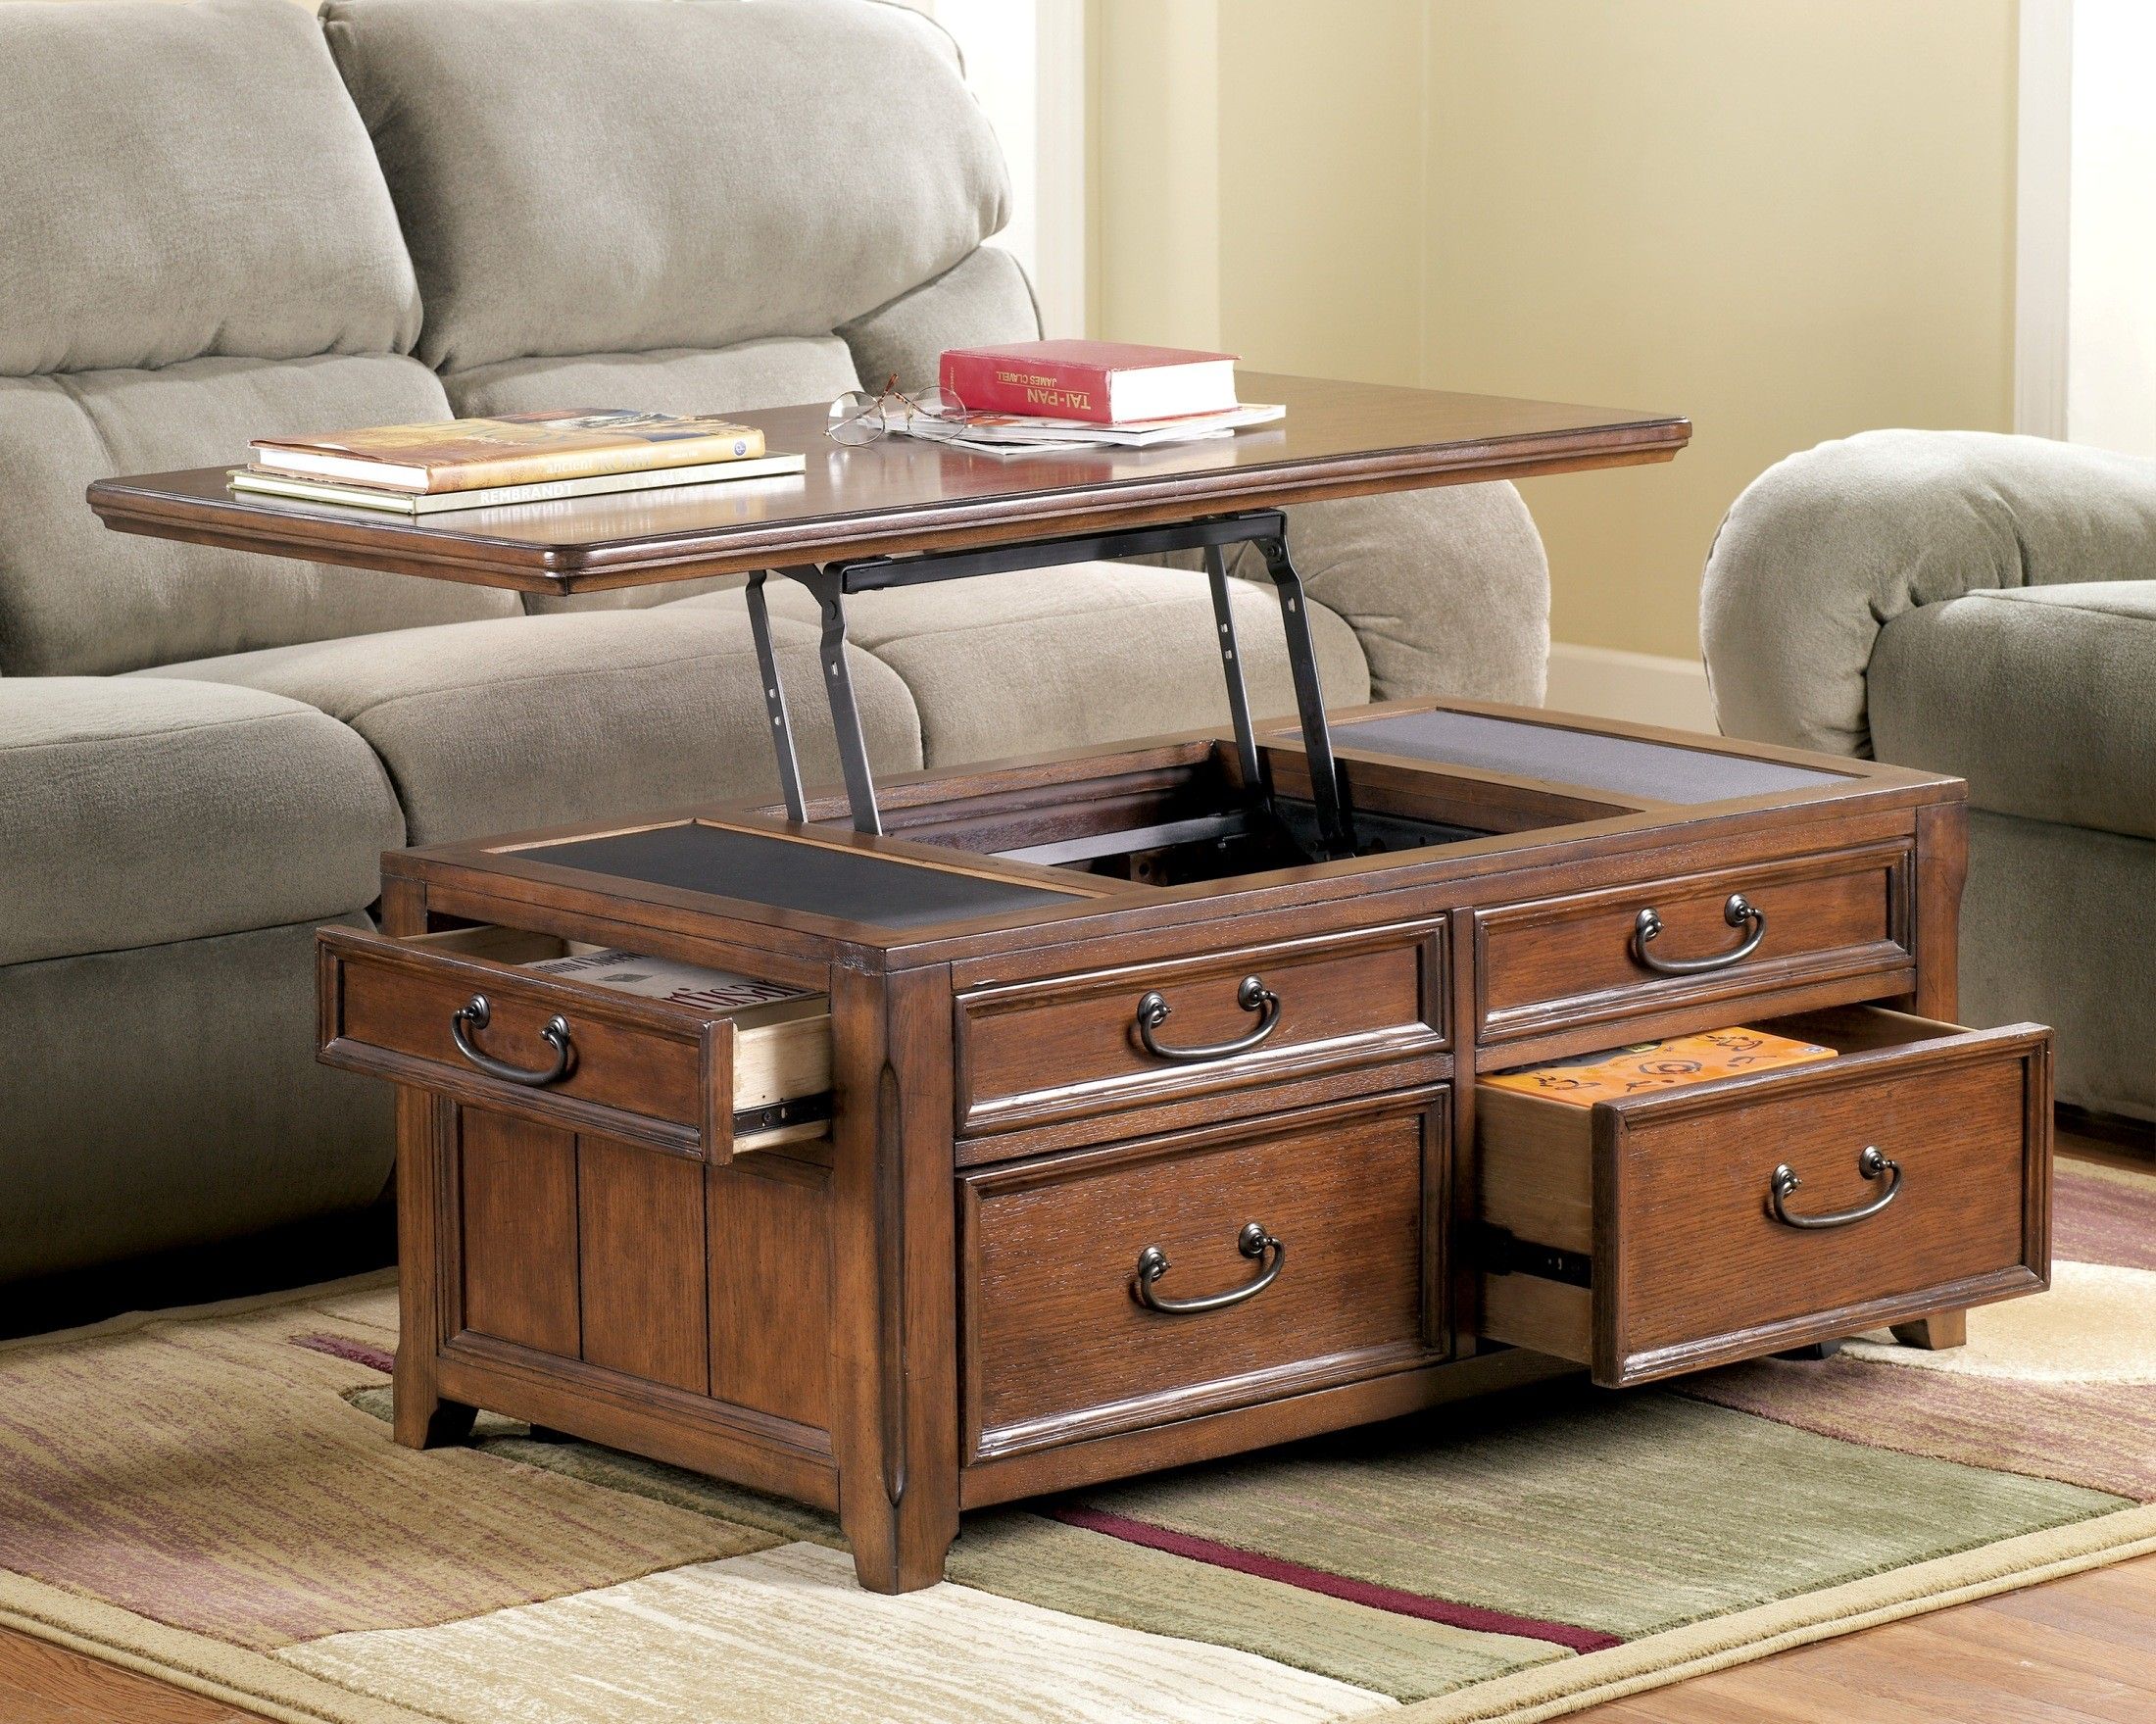 Woodboro Rectangular Lift Top Cocktail Table From Ashley (t478 20 Pertaining To Lift Top Coffee Tables With Storage (View 18 of 20)